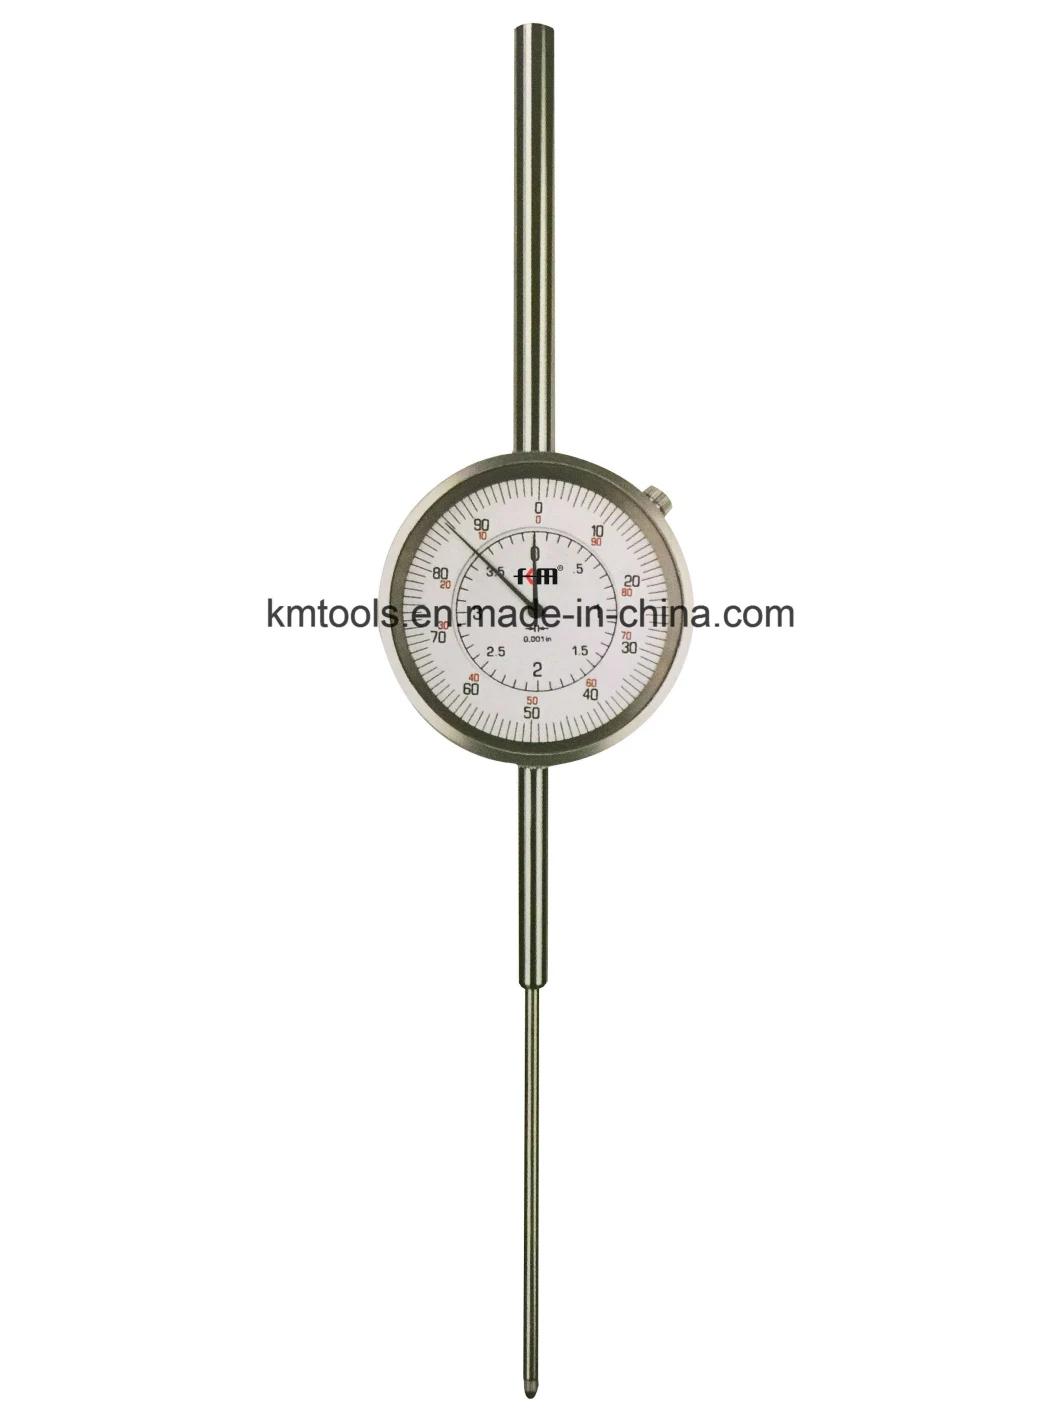 0-4′′ Wide Range Inch Dial Indicator with Graduation 0.001in